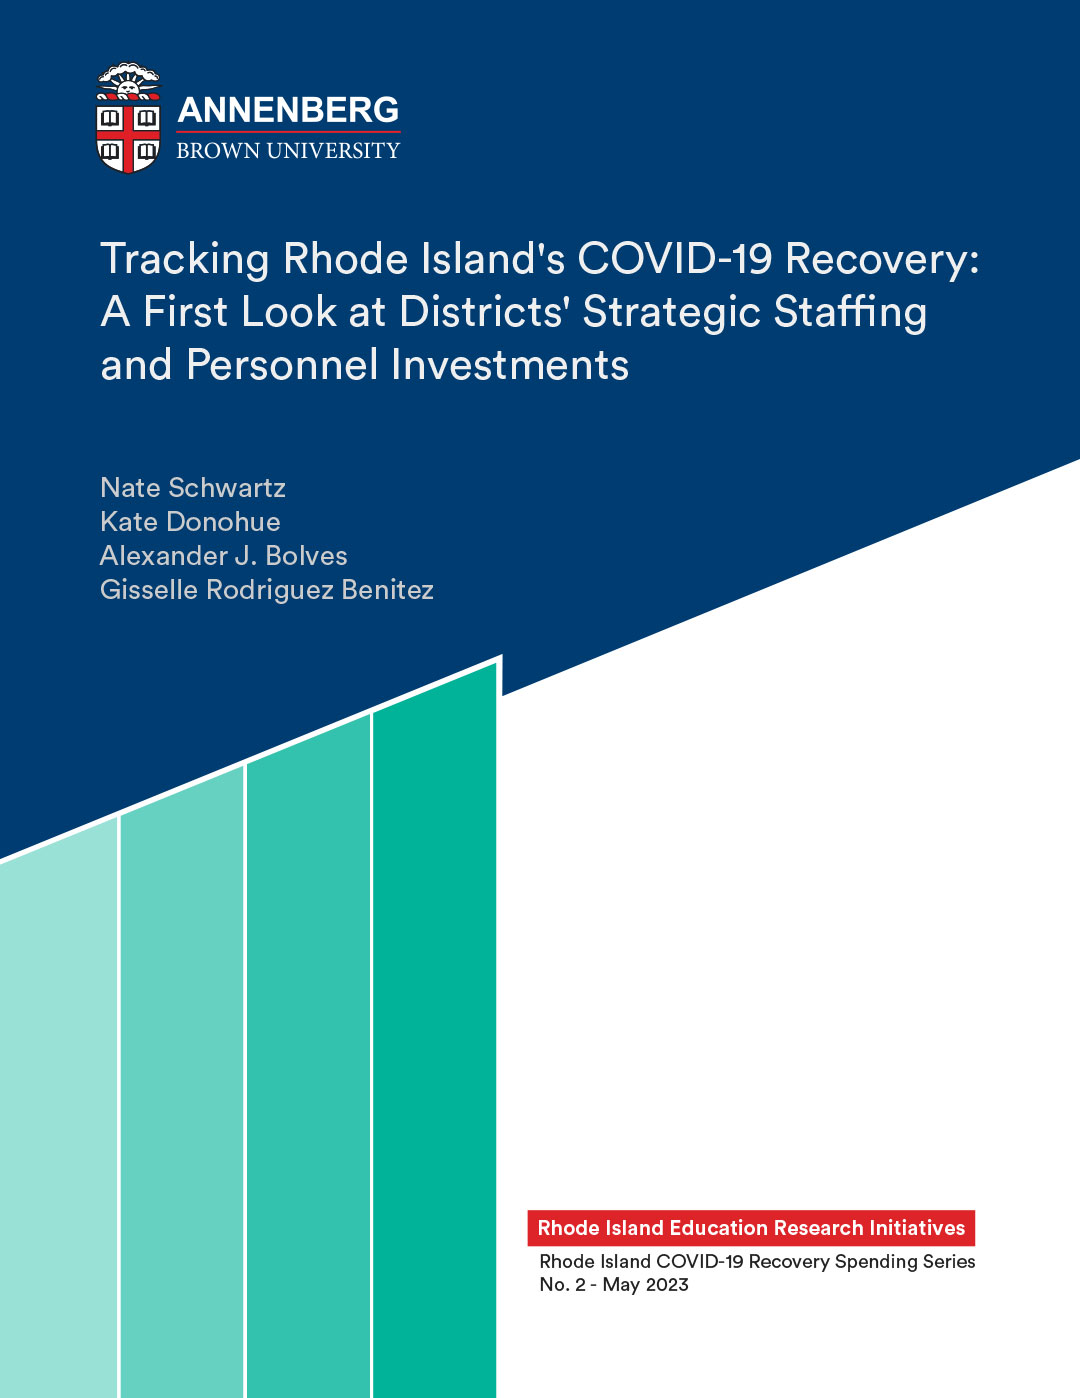 Tracking Rhode Island's Covid-Recovery: A First Look at Districts' Strategic Staffing and Personnel Investments